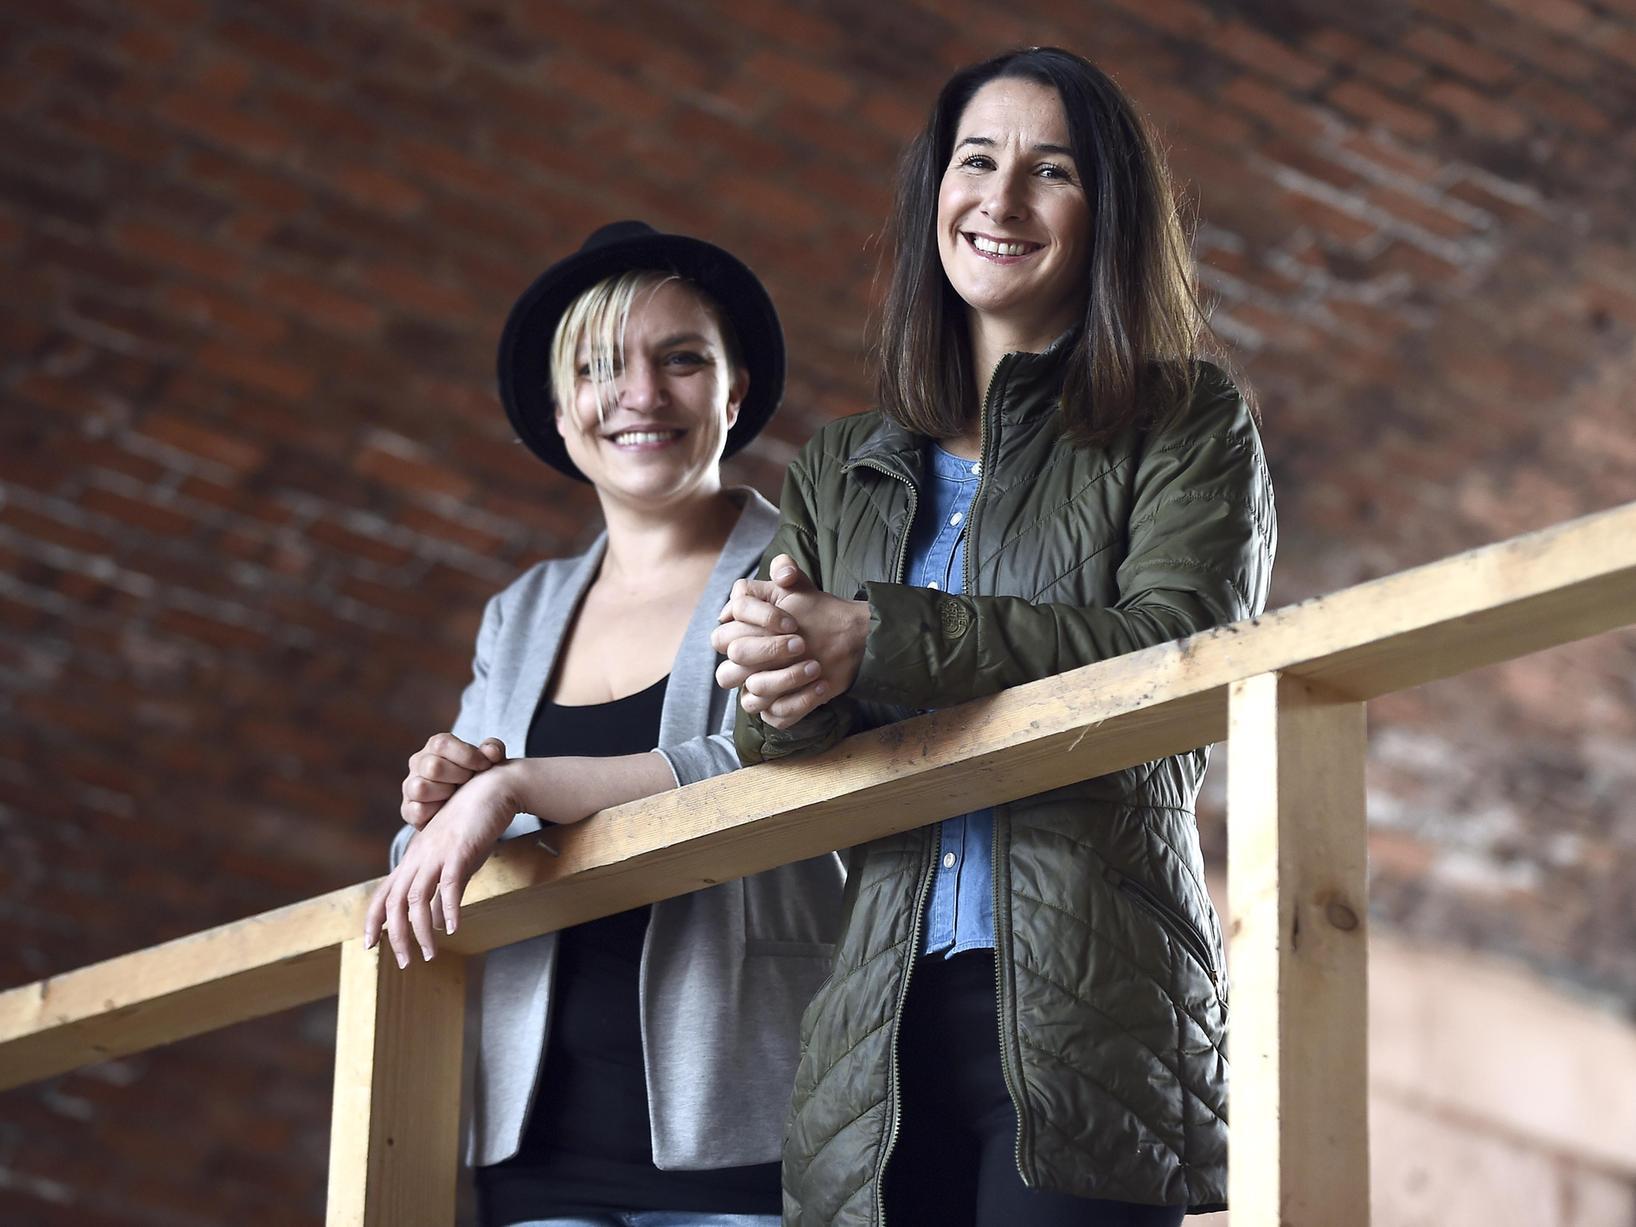 Carmen and Donna have been the driving force behind a major new project to transform the derelict Leith Arches into a food, drink, and event space.